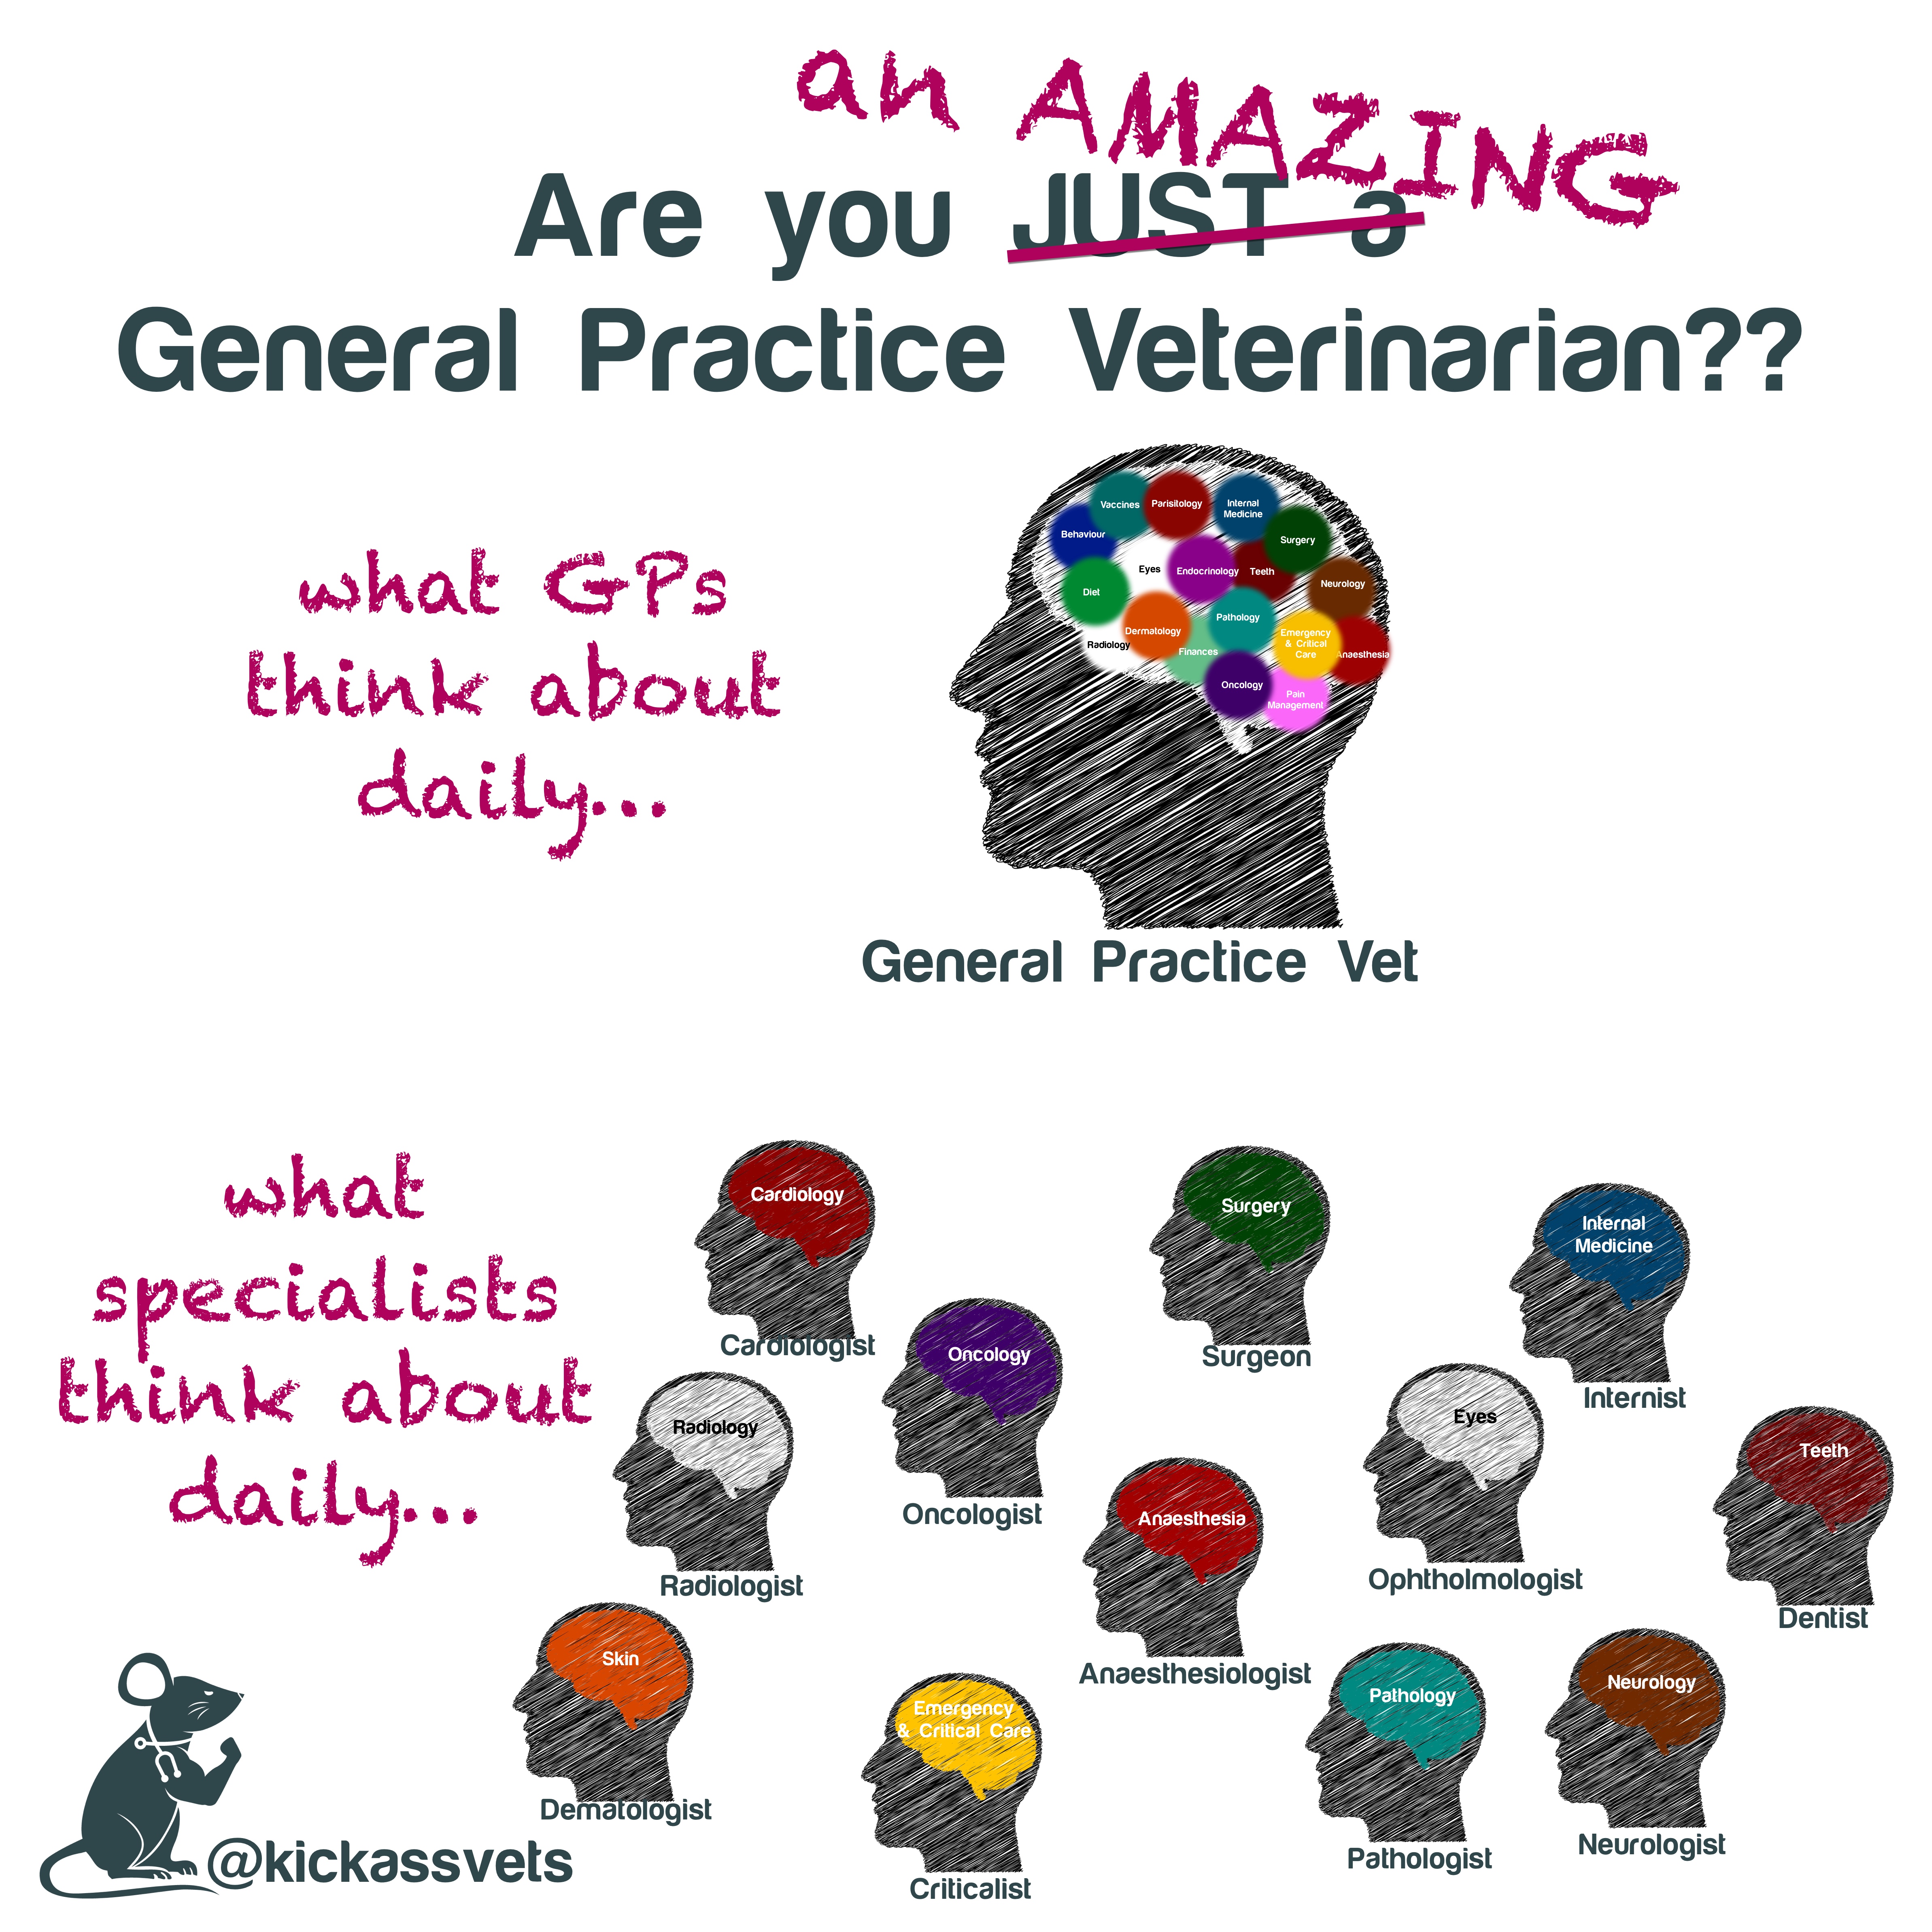 Image showing that GP vets think about all the specialty services all the time, and that being a GP vet is HARD!